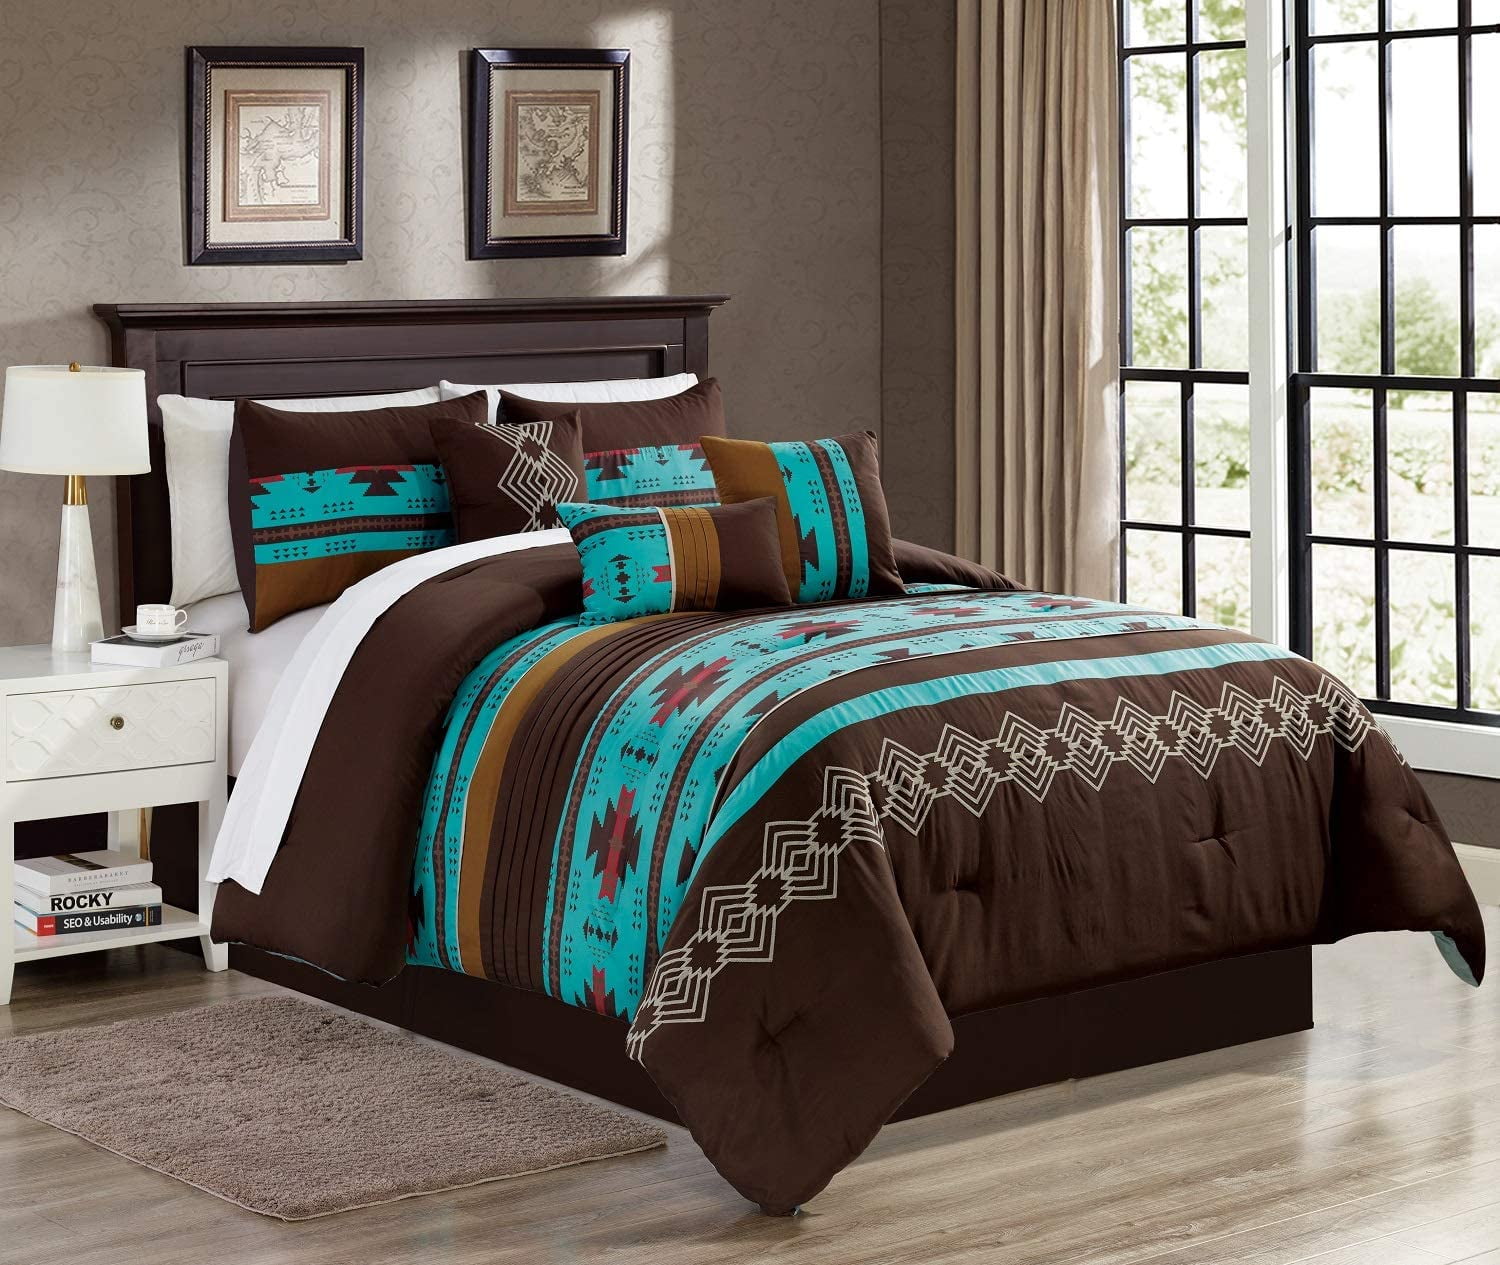 Details about   100% Cotton face Teal Water colors Floral 7 pcs Cal King Queen Comforter Set New 